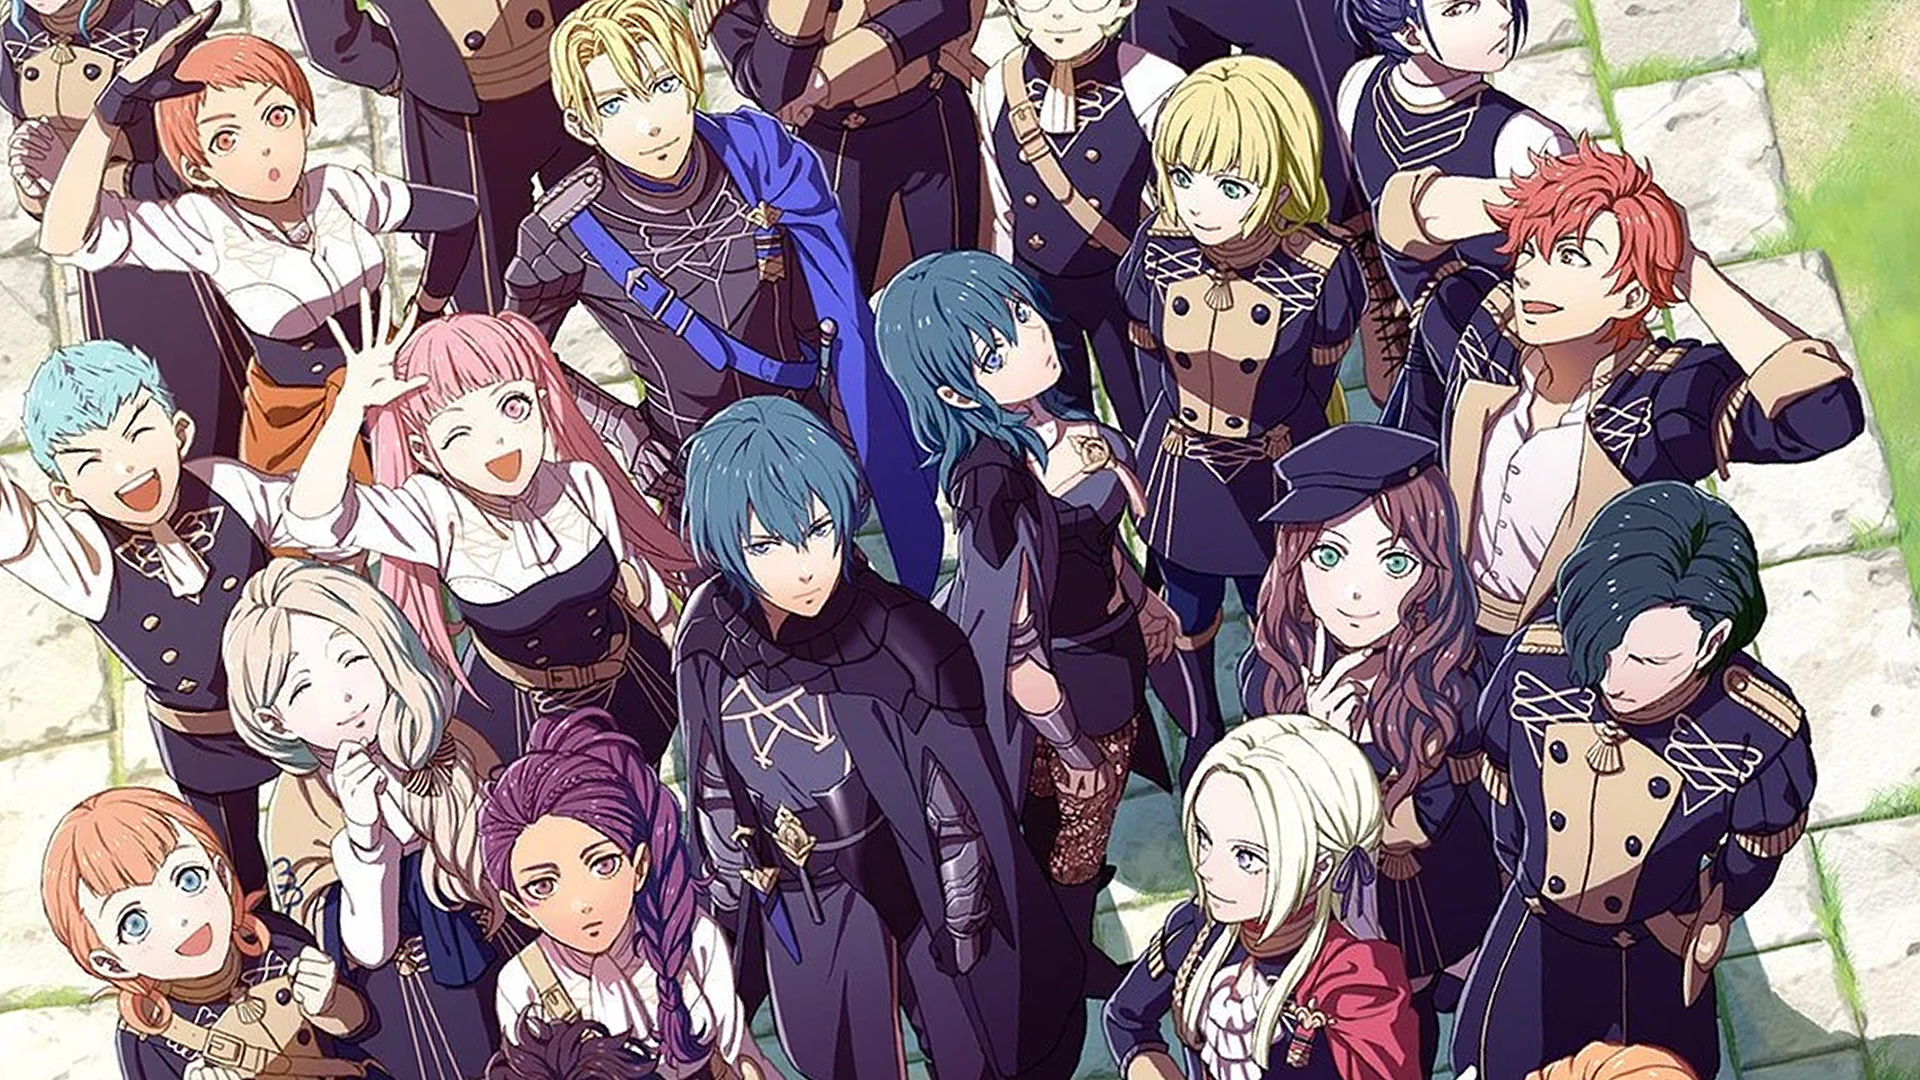 Supports and Romance - Fire Emblem: Three Houses Guide - IGN